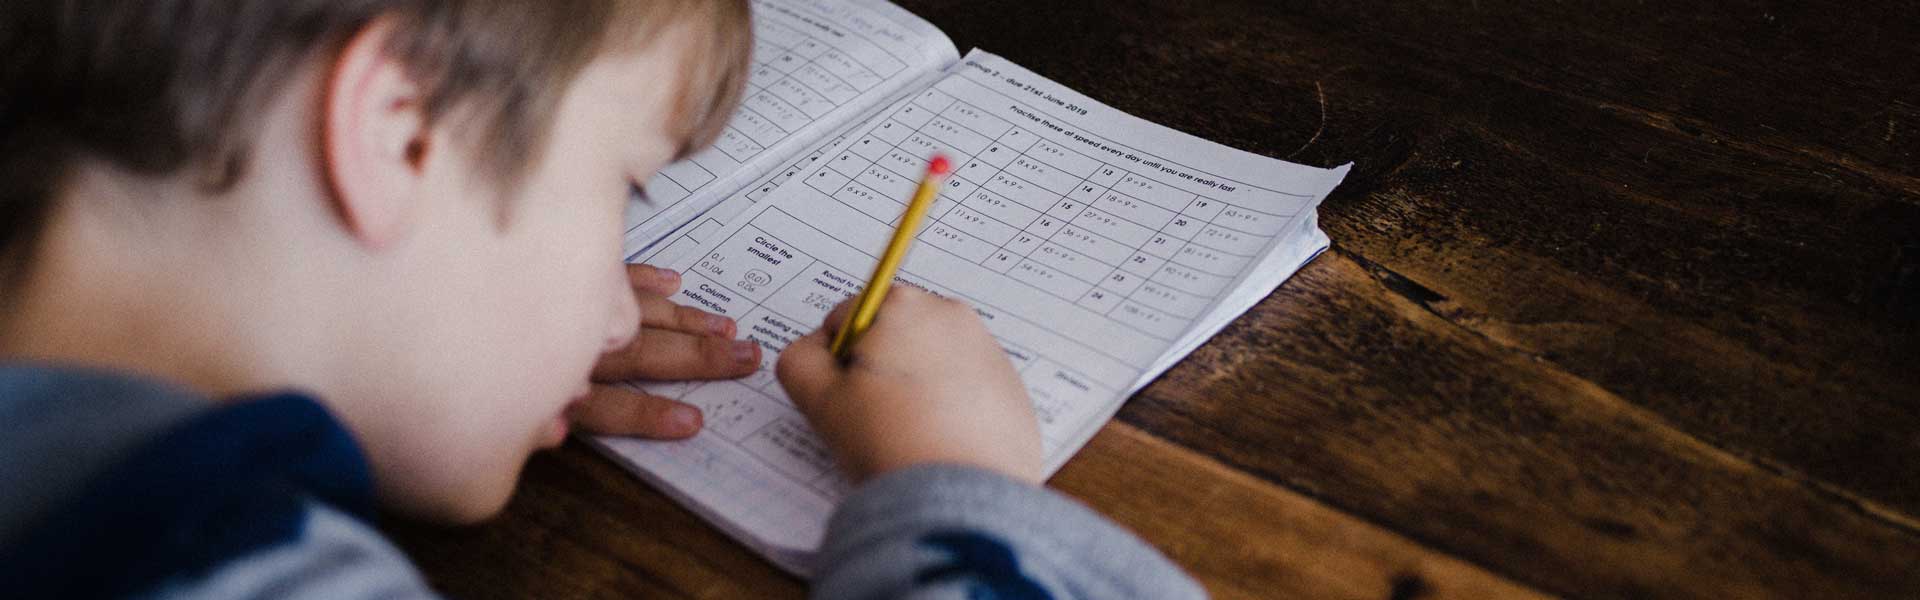 Best Strategies To Help Improve Your Child's Handwriting – Real OT